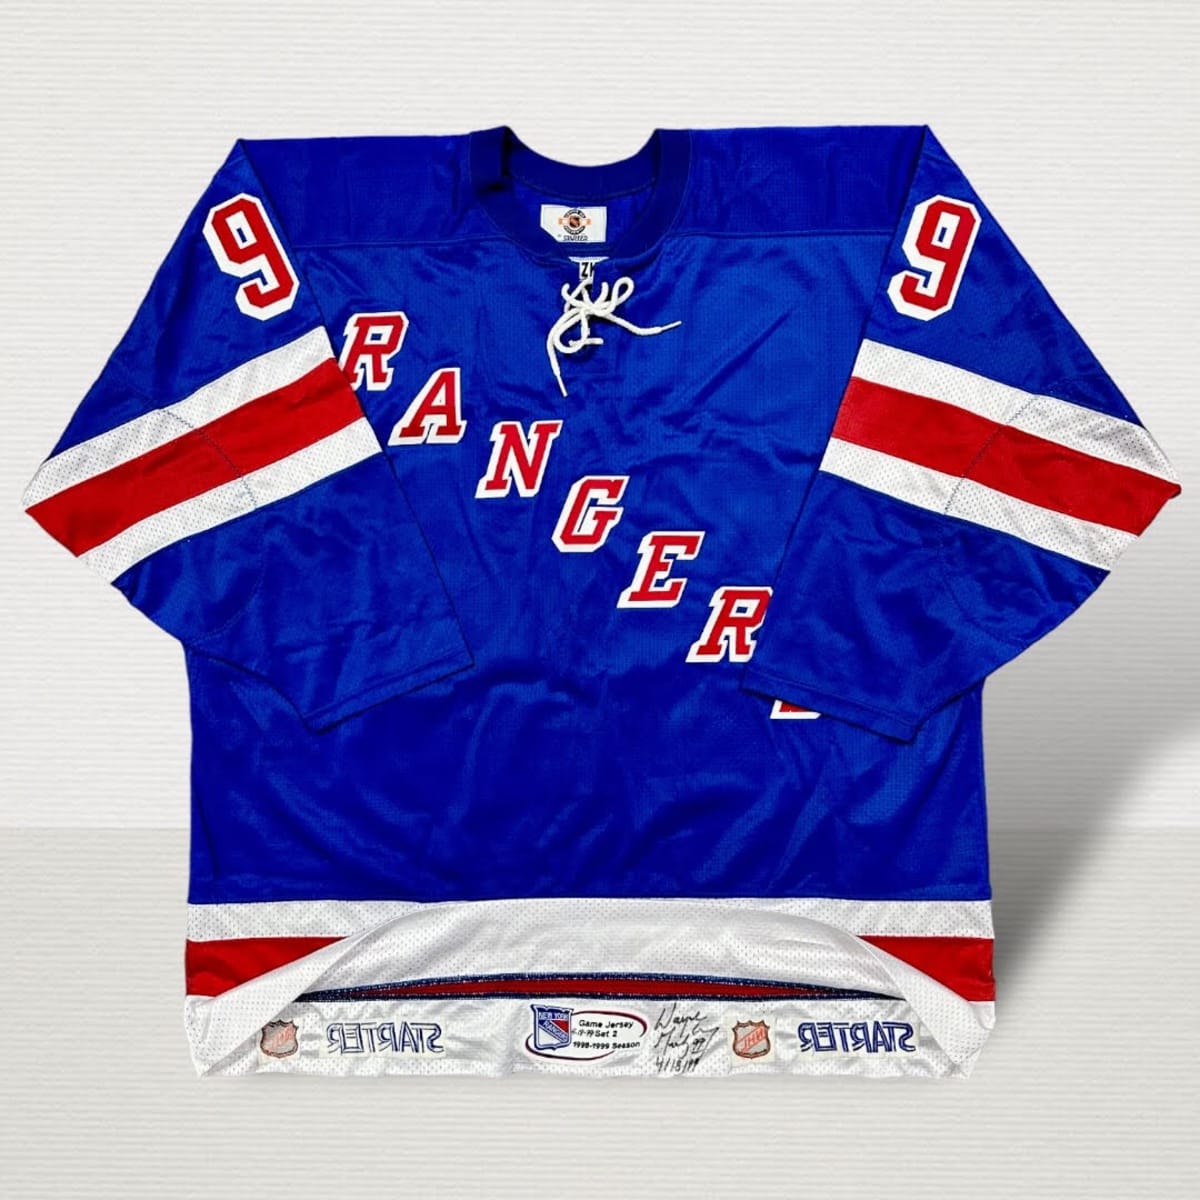 New York Rangers Collecting Guide, Tickets, Jerseys